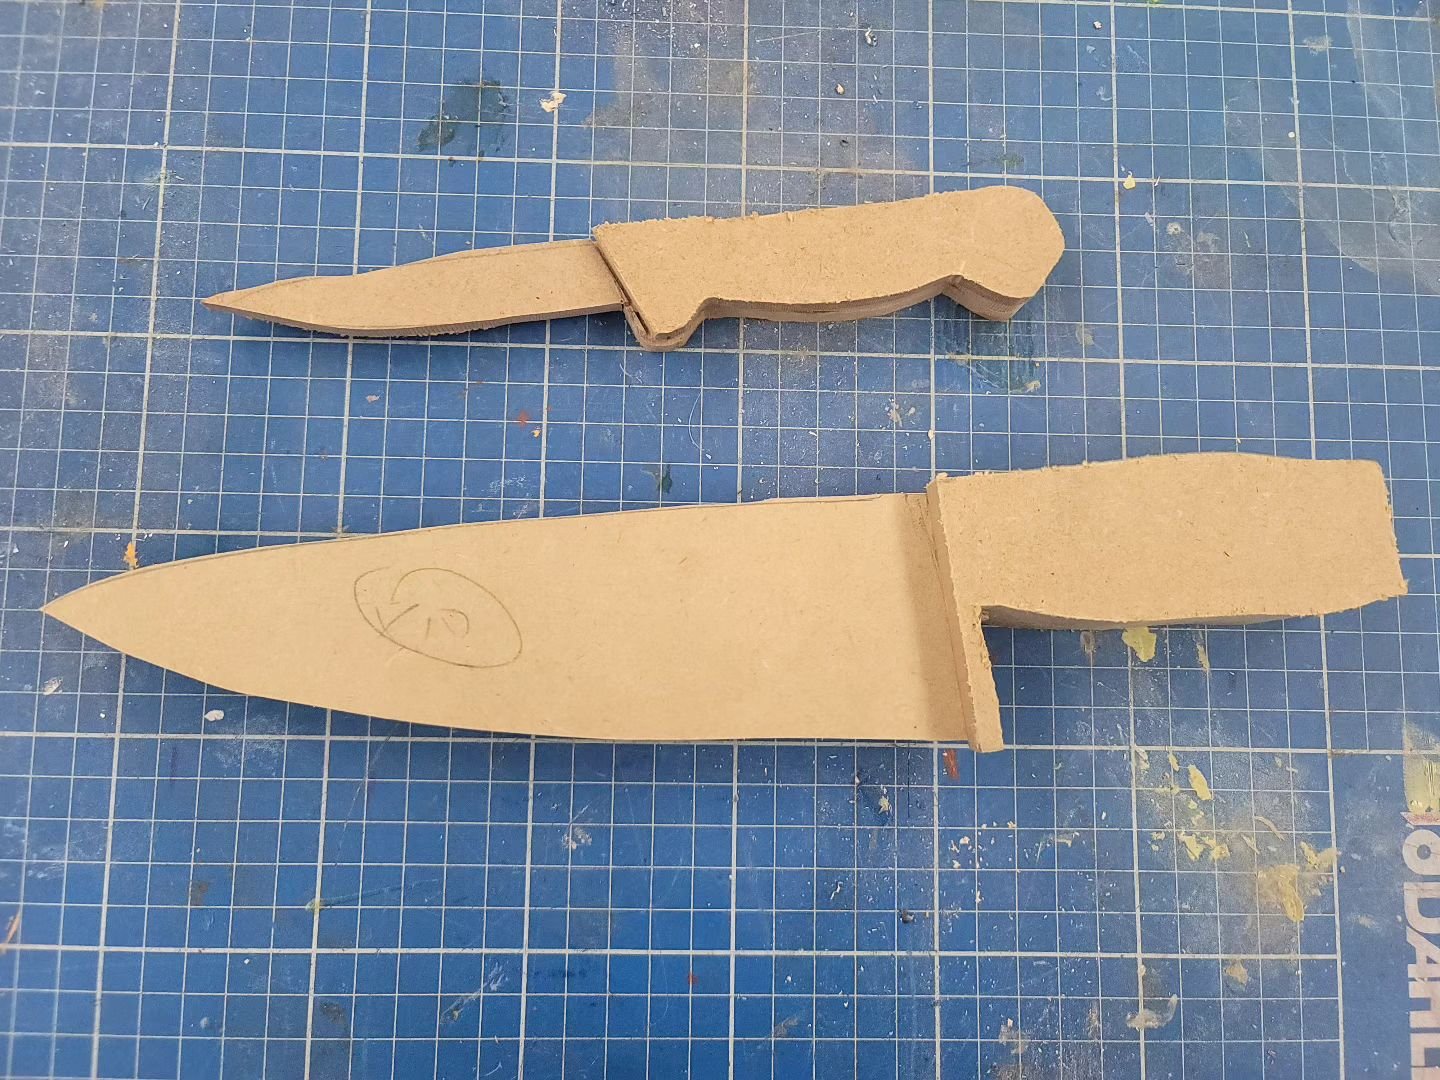 Job number one: Knife block making, in work it is always important to be able to quickly check thar knives are back. I am making stunt double knives so I can work out the spacing for 20 knives 

#designandtechnology #dt #stem #steam #foodtech #cateri